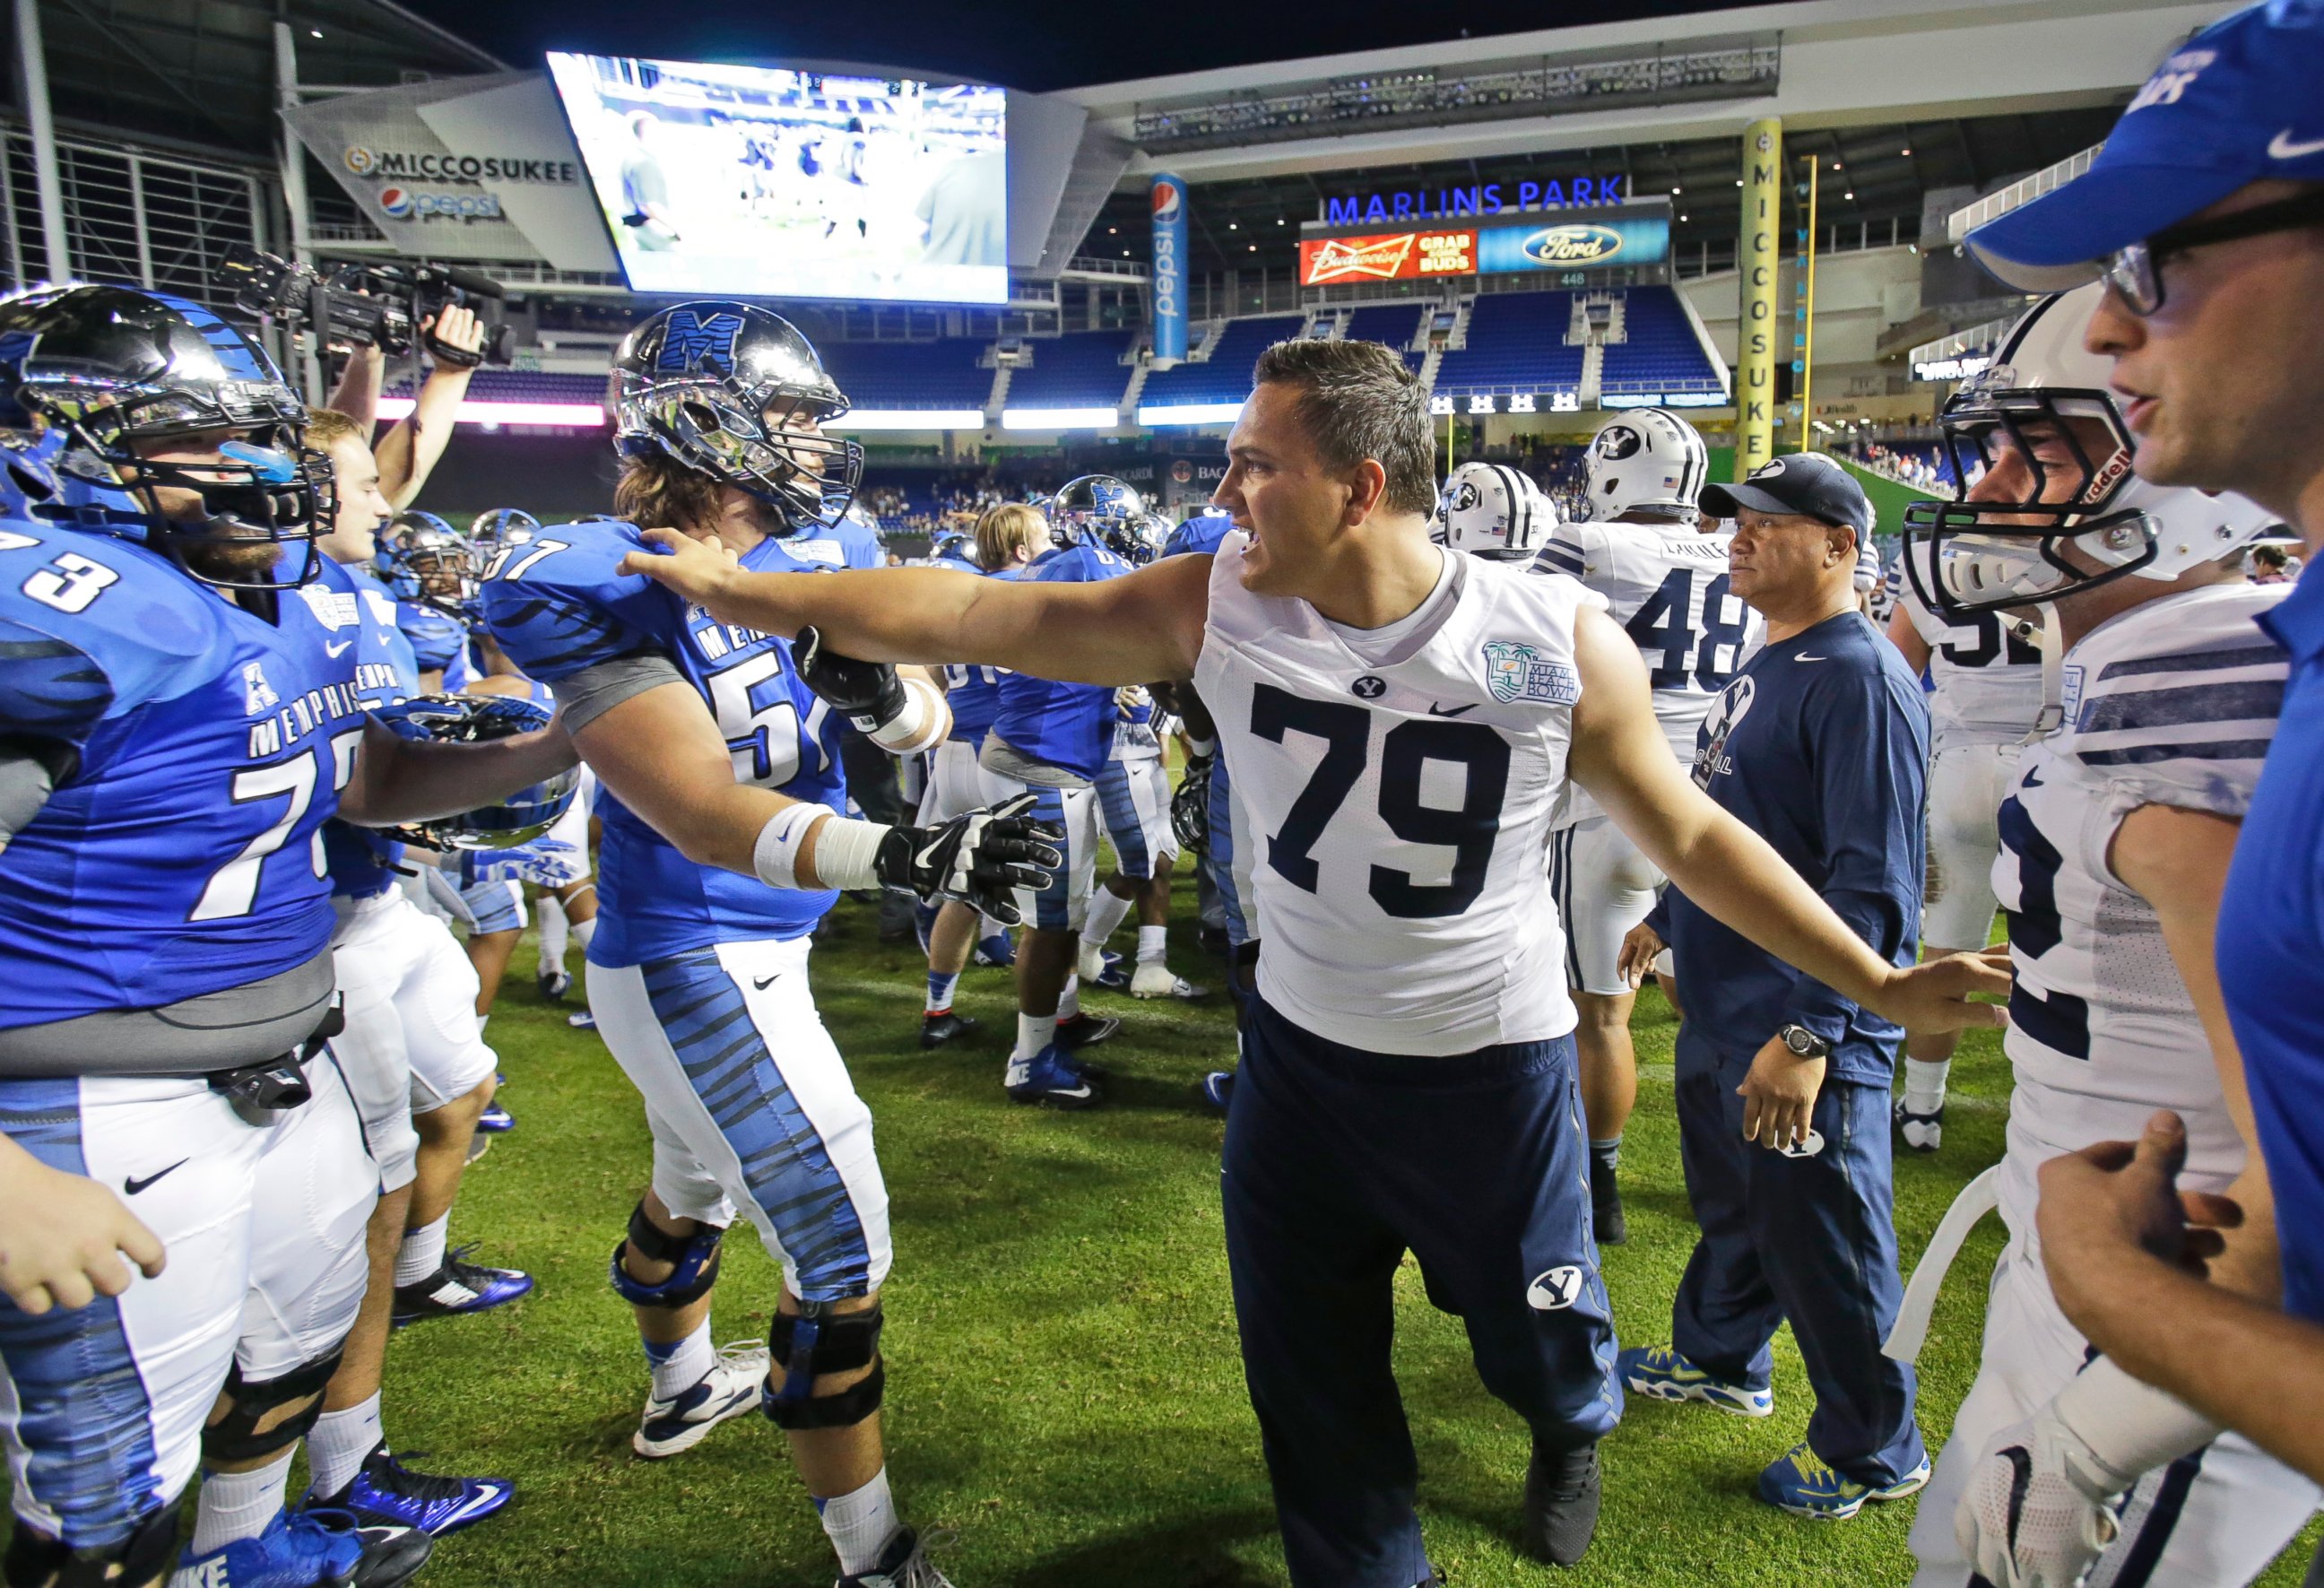 PHOTO: BYU's Latanoa Pikula intercedes in a brawl after Memphis defeated BYU Young 55-48 in two overtimes in the inaugural Miami Beach Bowl NCAA college football game, Dec. 22, 2014, in Miami.